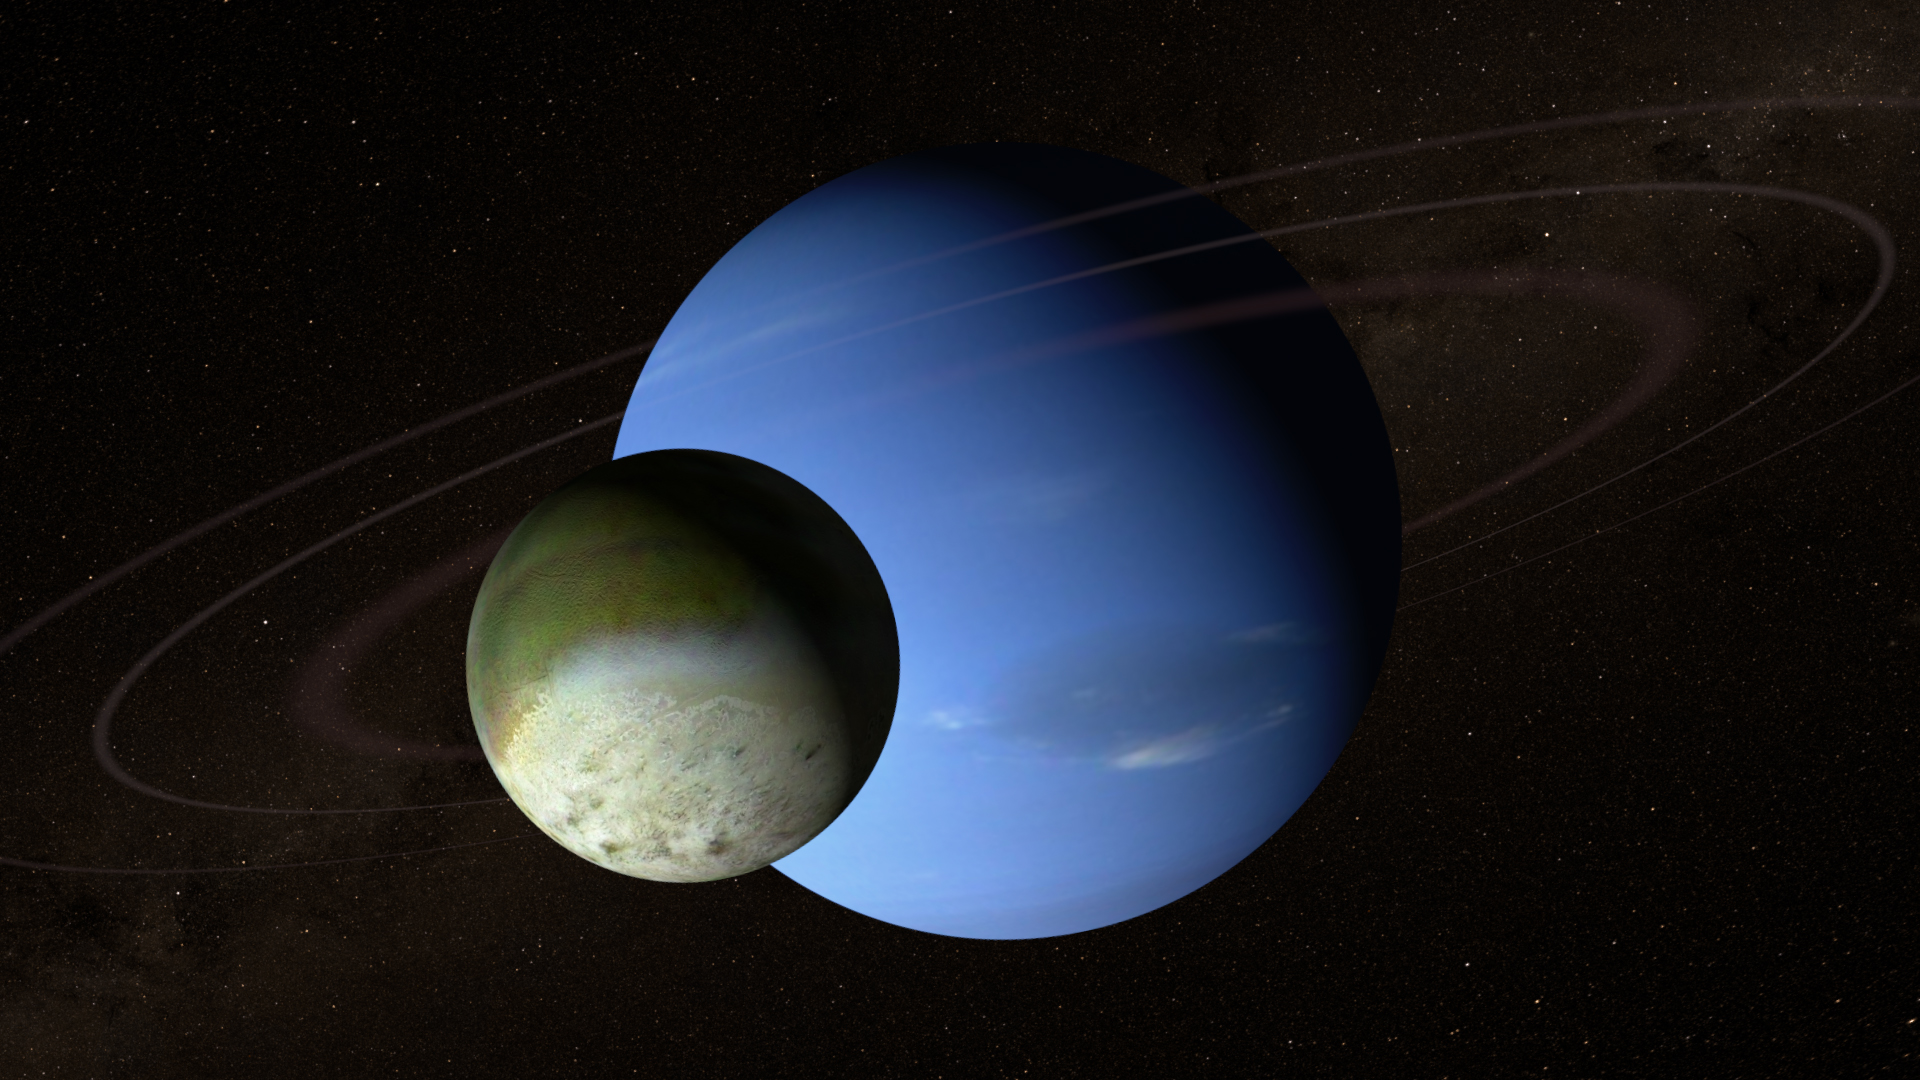 A tan sphere is shown blocking out a portion of the blue sphere of Neptune in the background. Faint elliptical rings surround the blue orb.